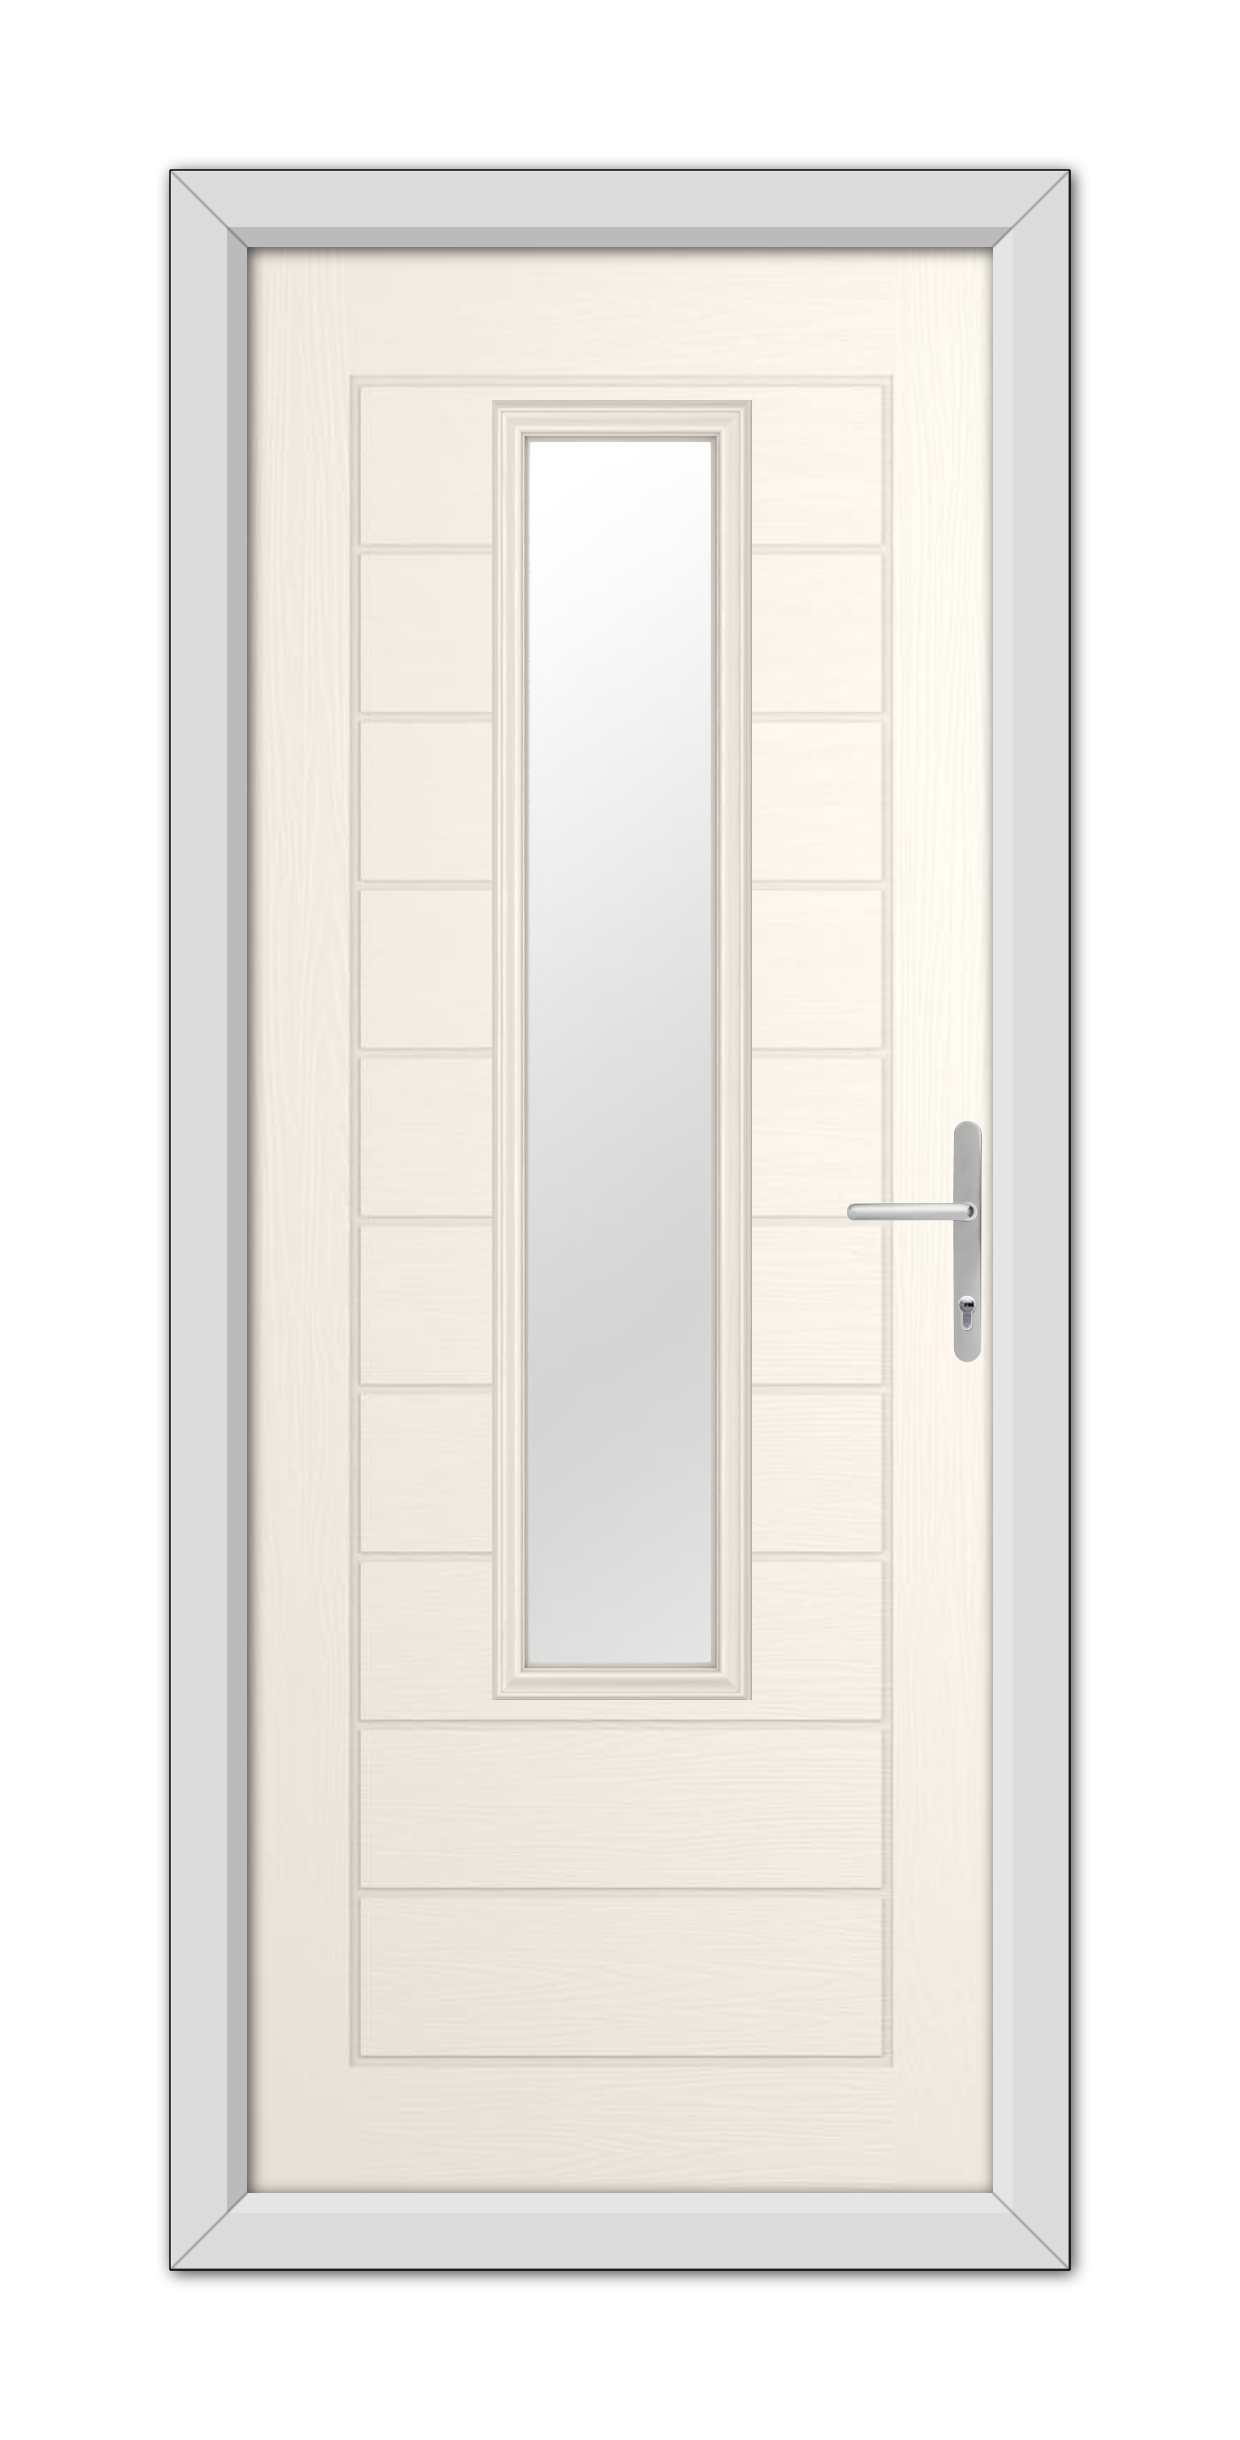 A White Foil Bedford Composite Door 48mm Timber Core with a vertical glass panel and silver handle, set in a white door frame.